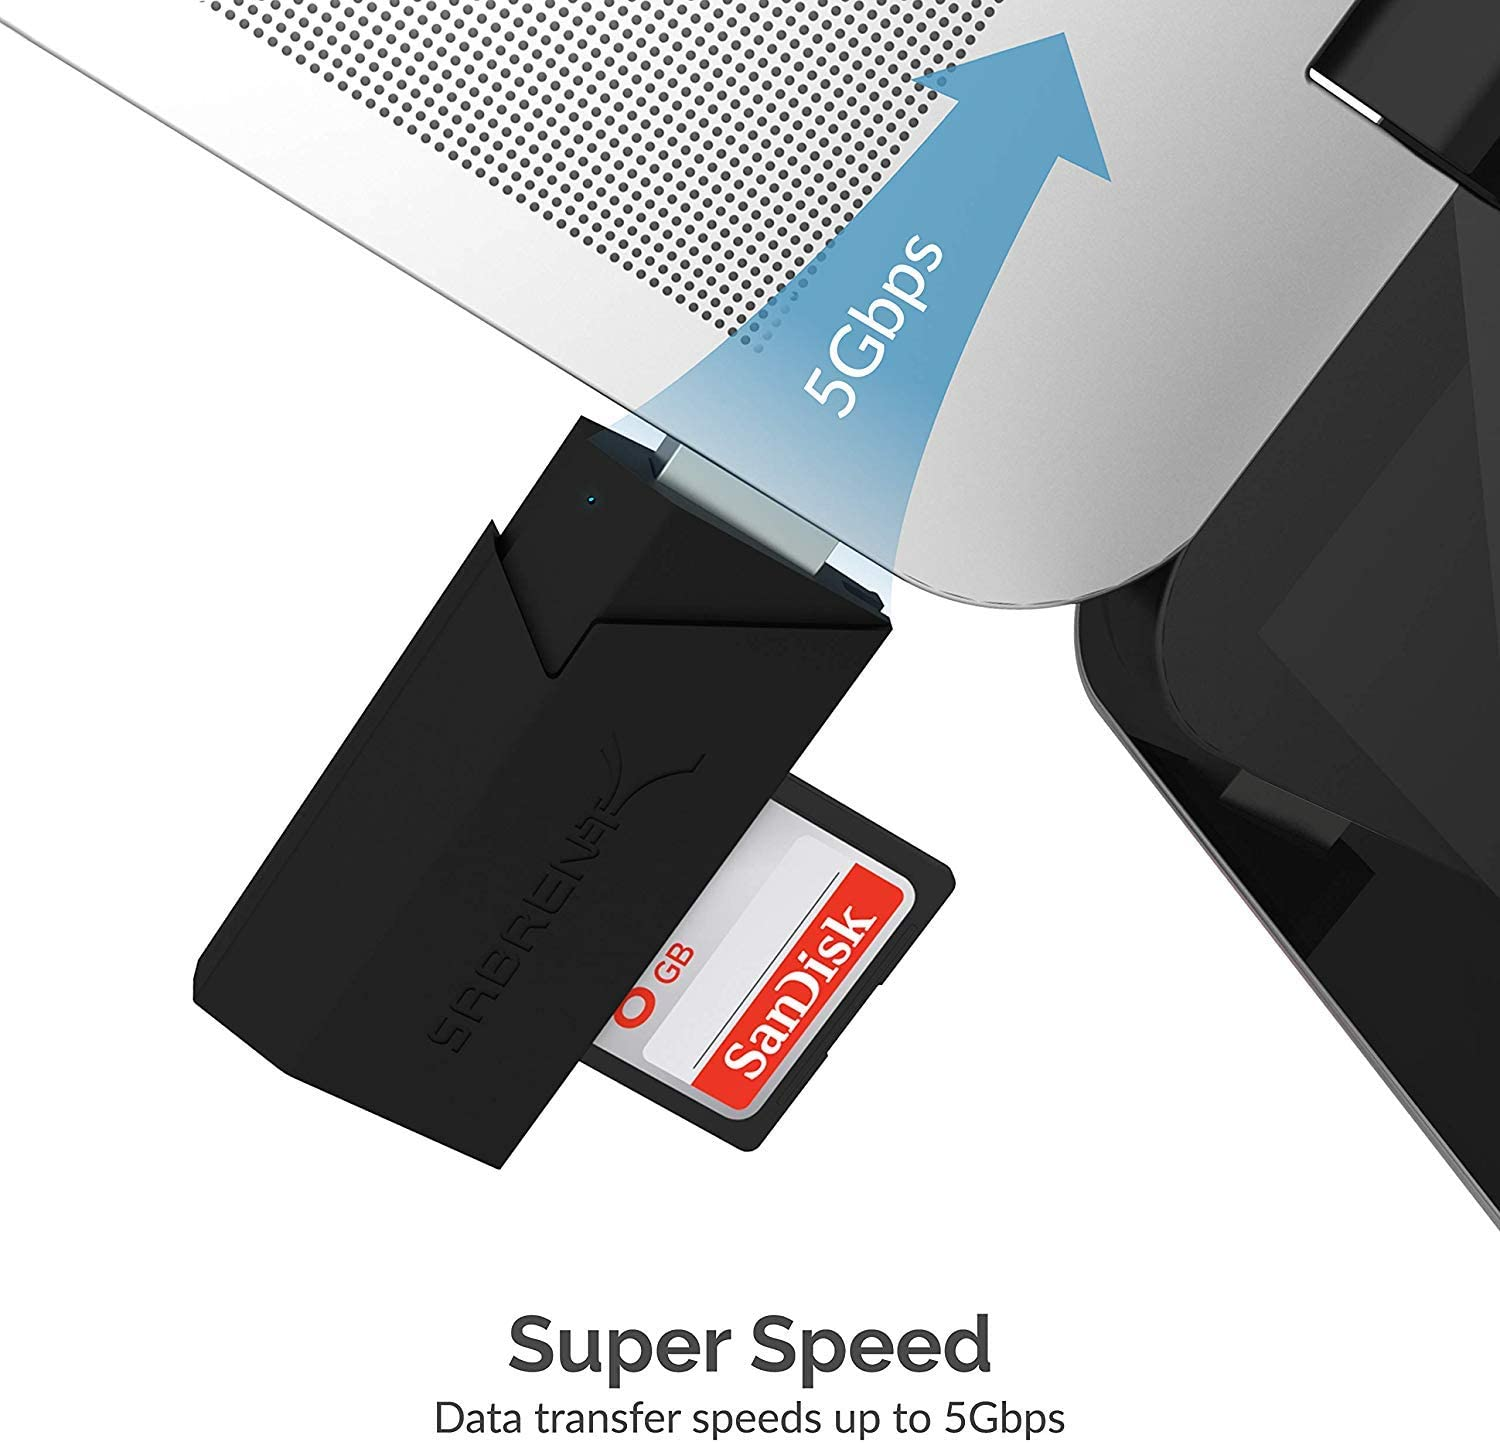 SABRENT SuperSpeed 2 Slot USB 3.0 Flash Memory Card Reader for Windows, Mac, Linux, and Certain Android Systems Supports SD, SDHC, SDXC, MMC/MicroSD, T Flash [Black] (CR-UMSS)